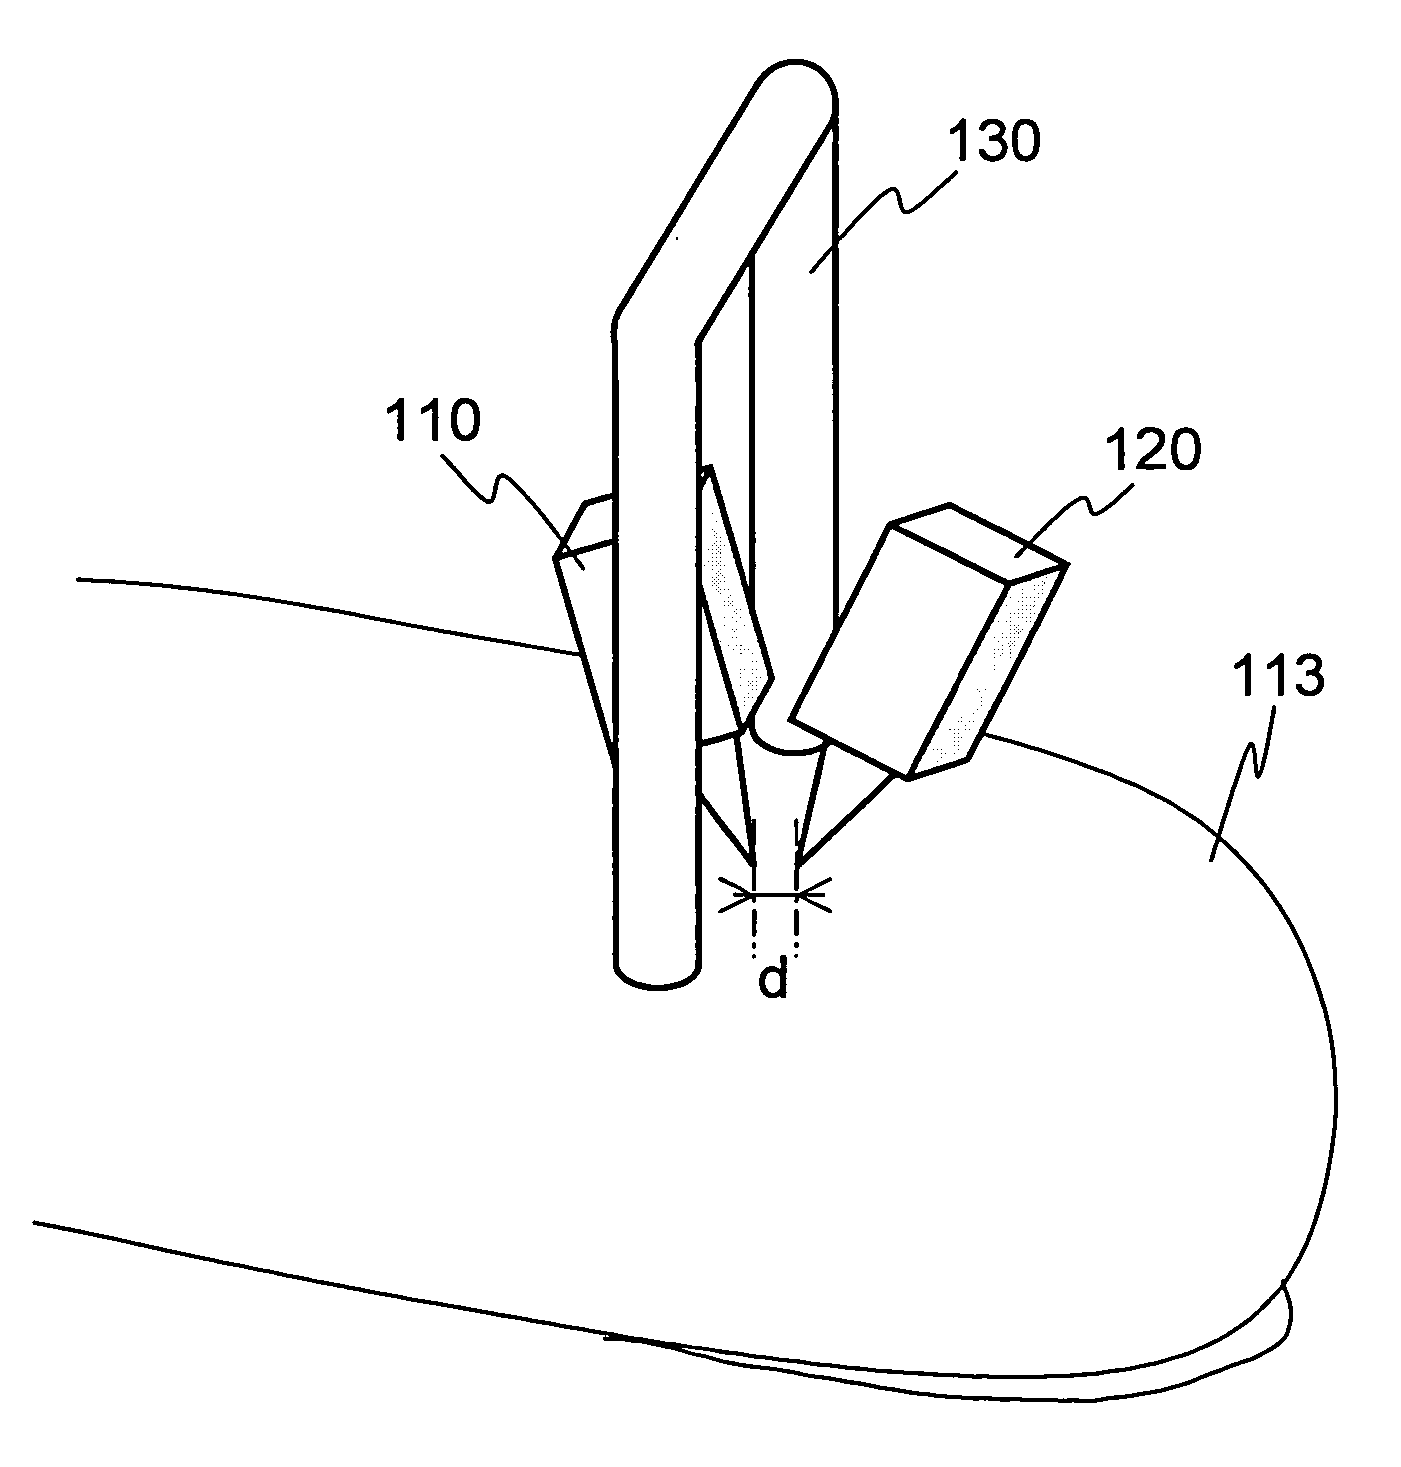 Optical measuring device for substances in vivo